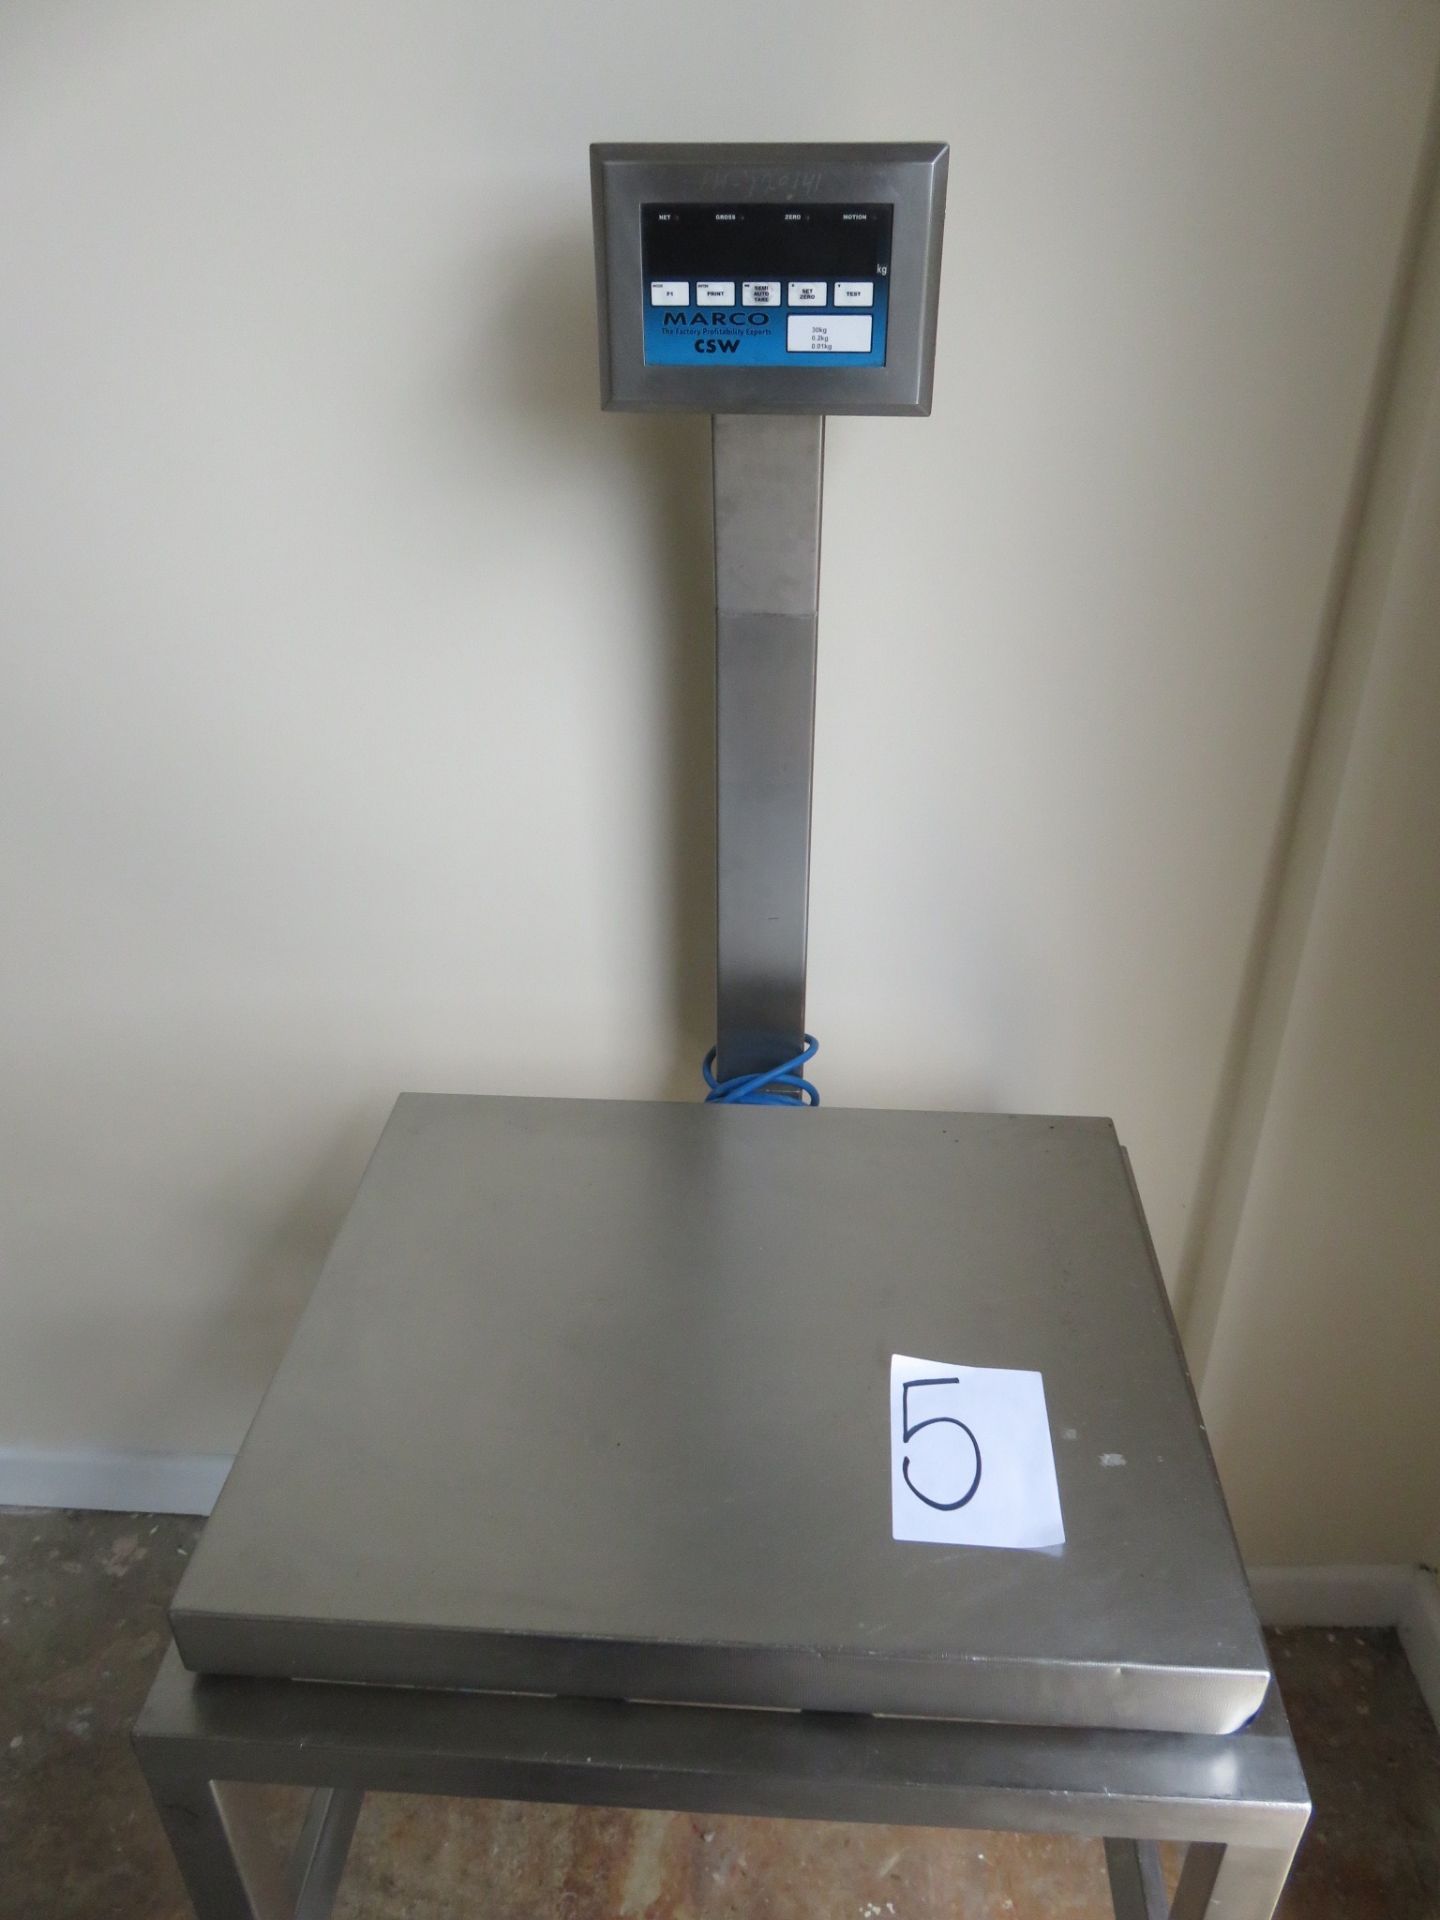 CWS Scale. Totally S/s on mobile stand. Weight 0.01kg to 30 kg. single phase lift out £5